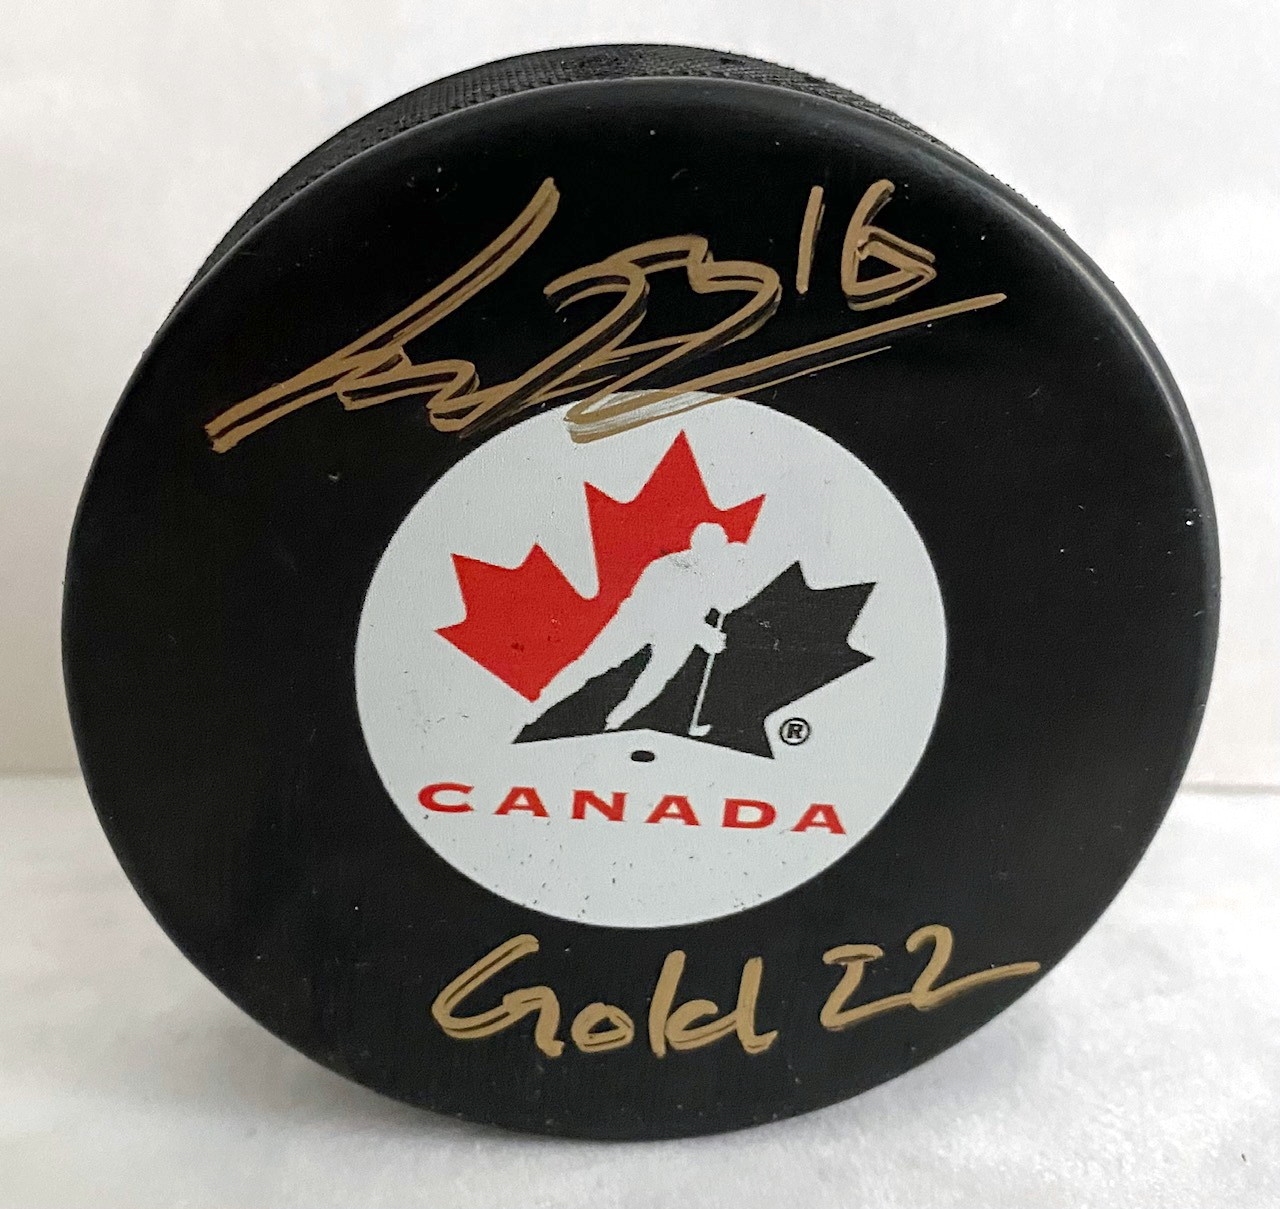 Connor Bedard Team Canada Signed World Juniors Puck with Gold 22 Note